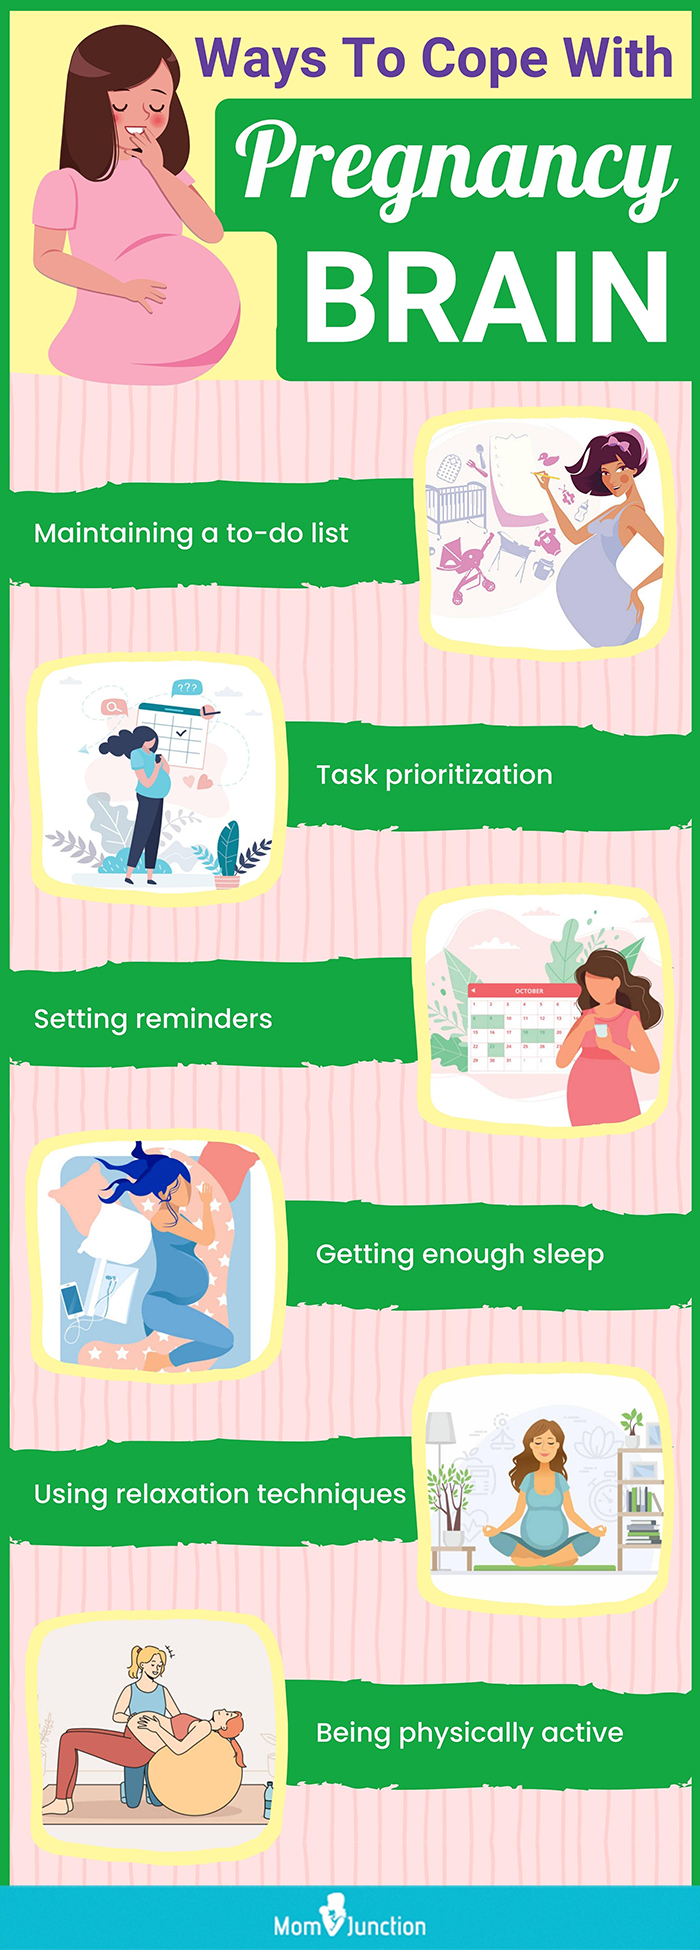 ways to cope with pregnancy brain (infographic)